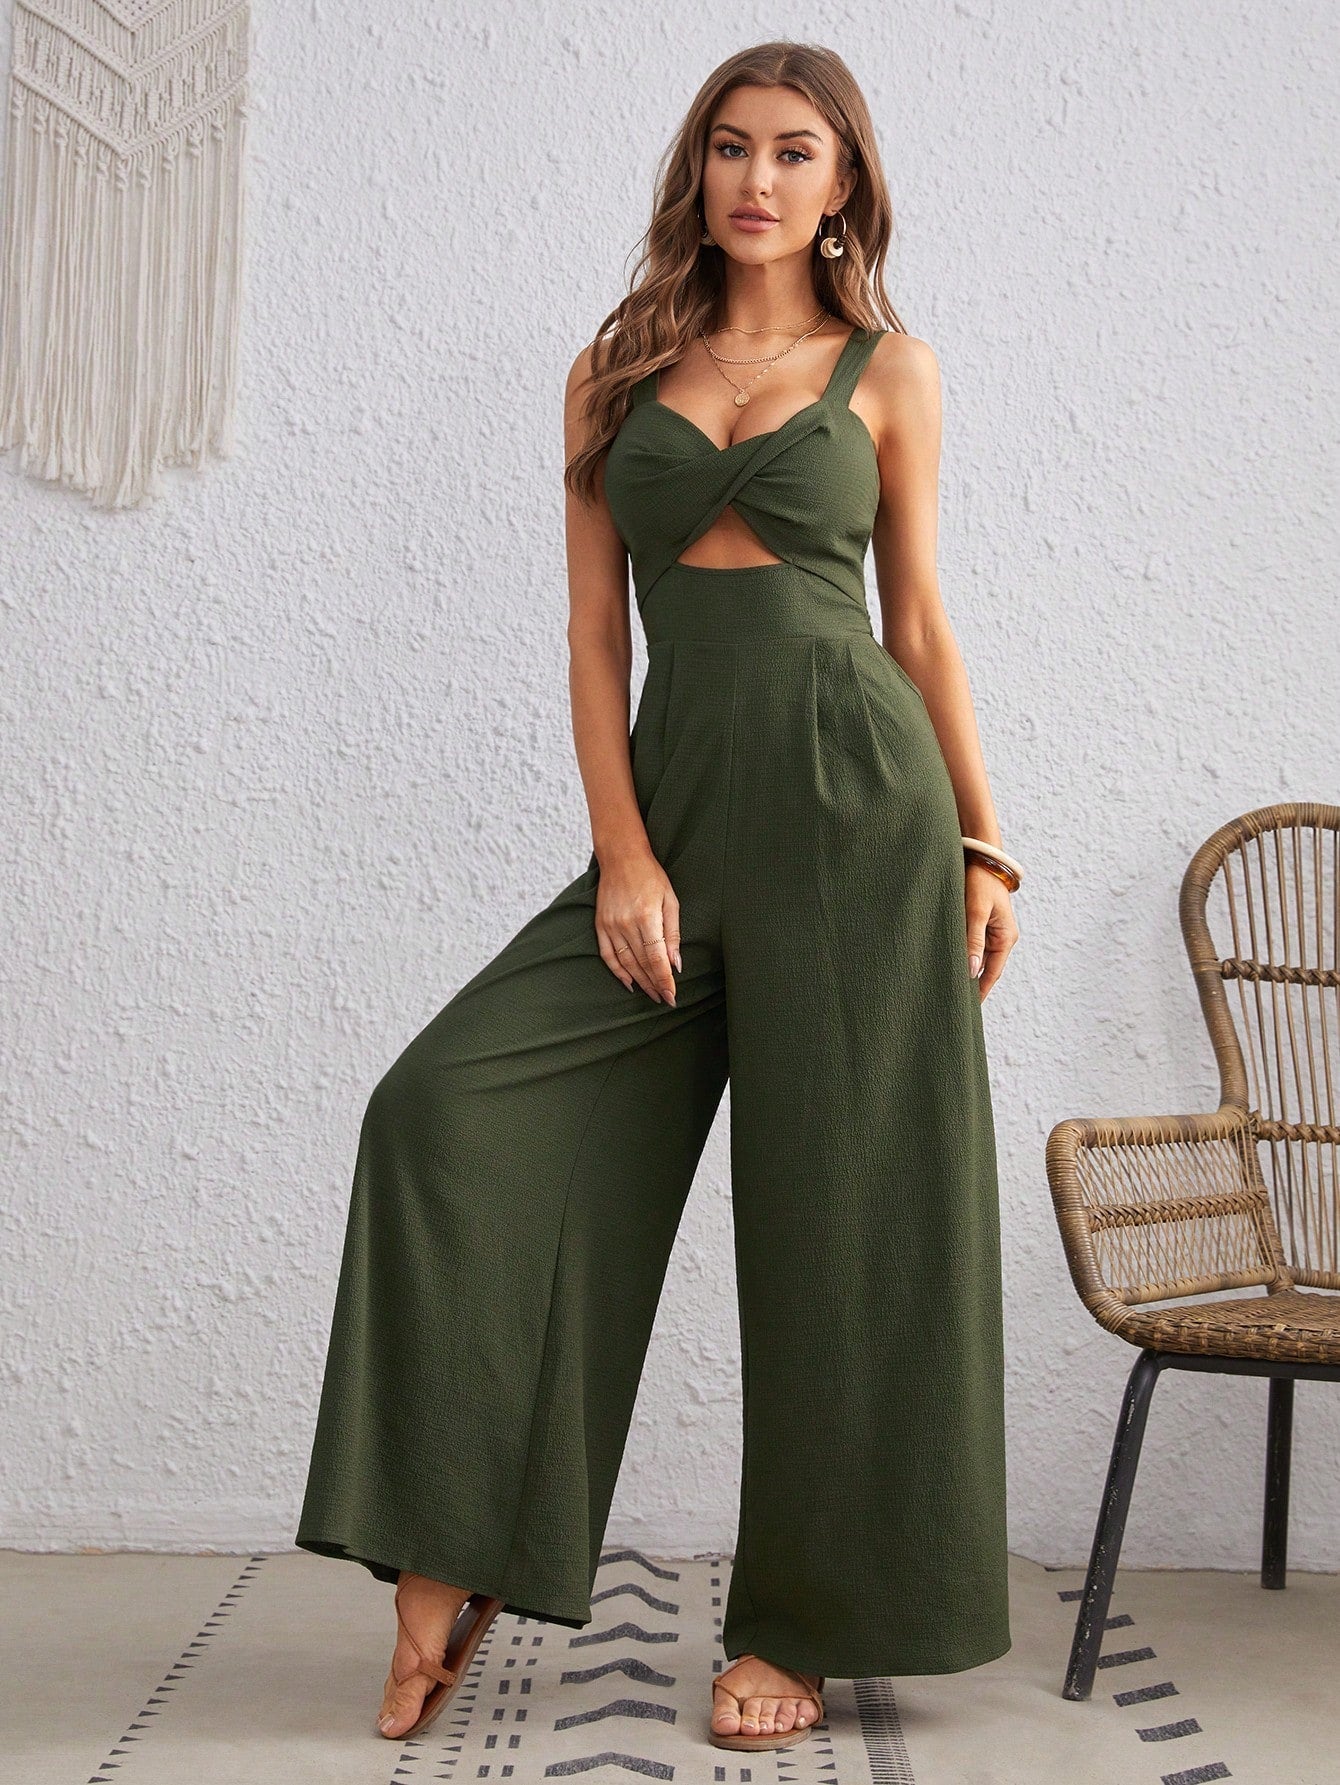 VCAY Women's Solid Color Loose Overall Jumpsuit With Spaghetti Straps